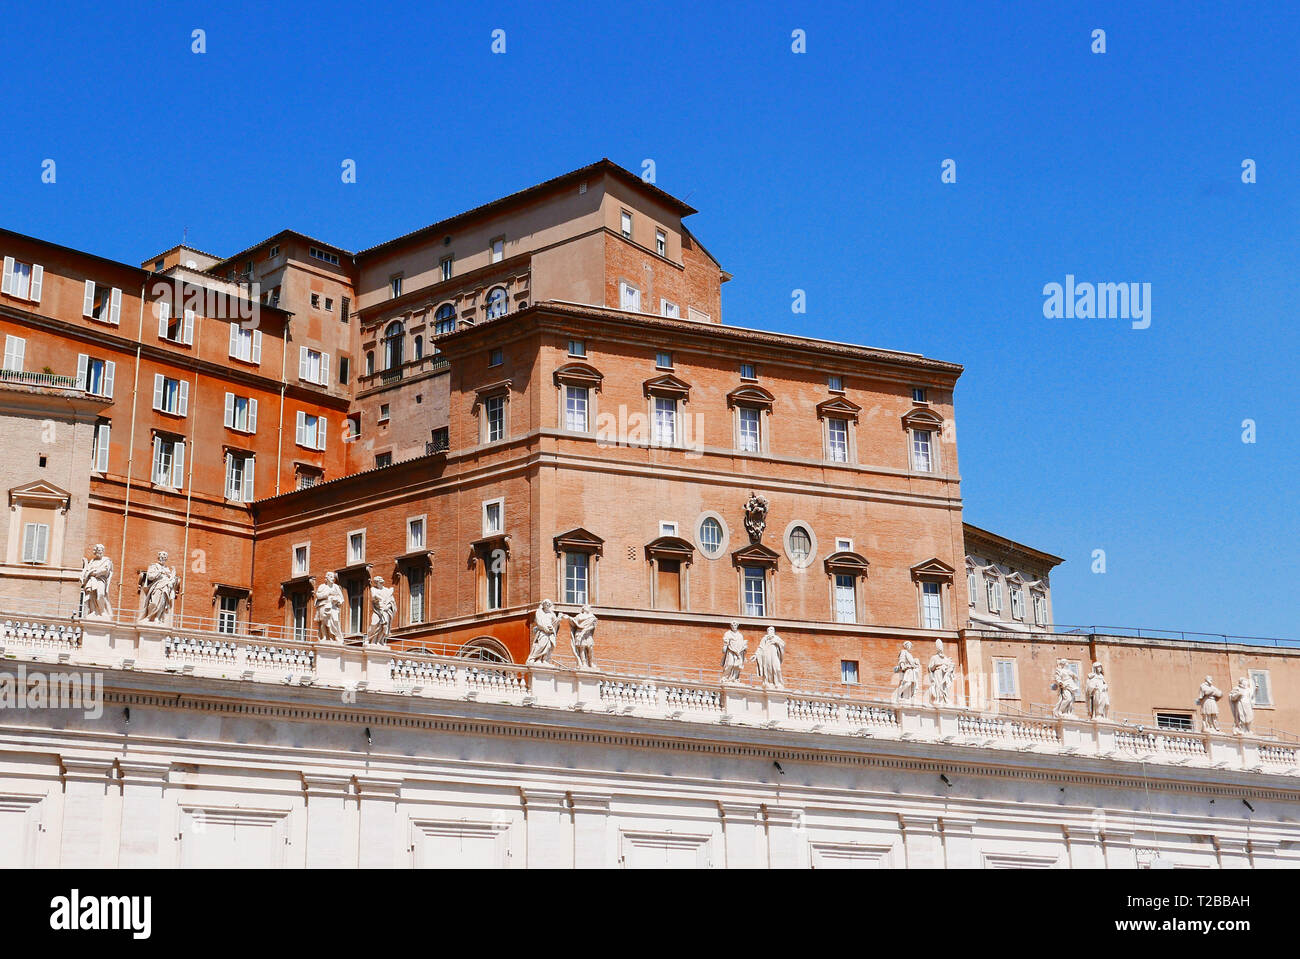 The Apostolic Palace or Papal Palace,Palace of Sixtus V( the builder) on St Peter's Square, Rome. The Papal Appartments are behind the curtains. Stock Photo